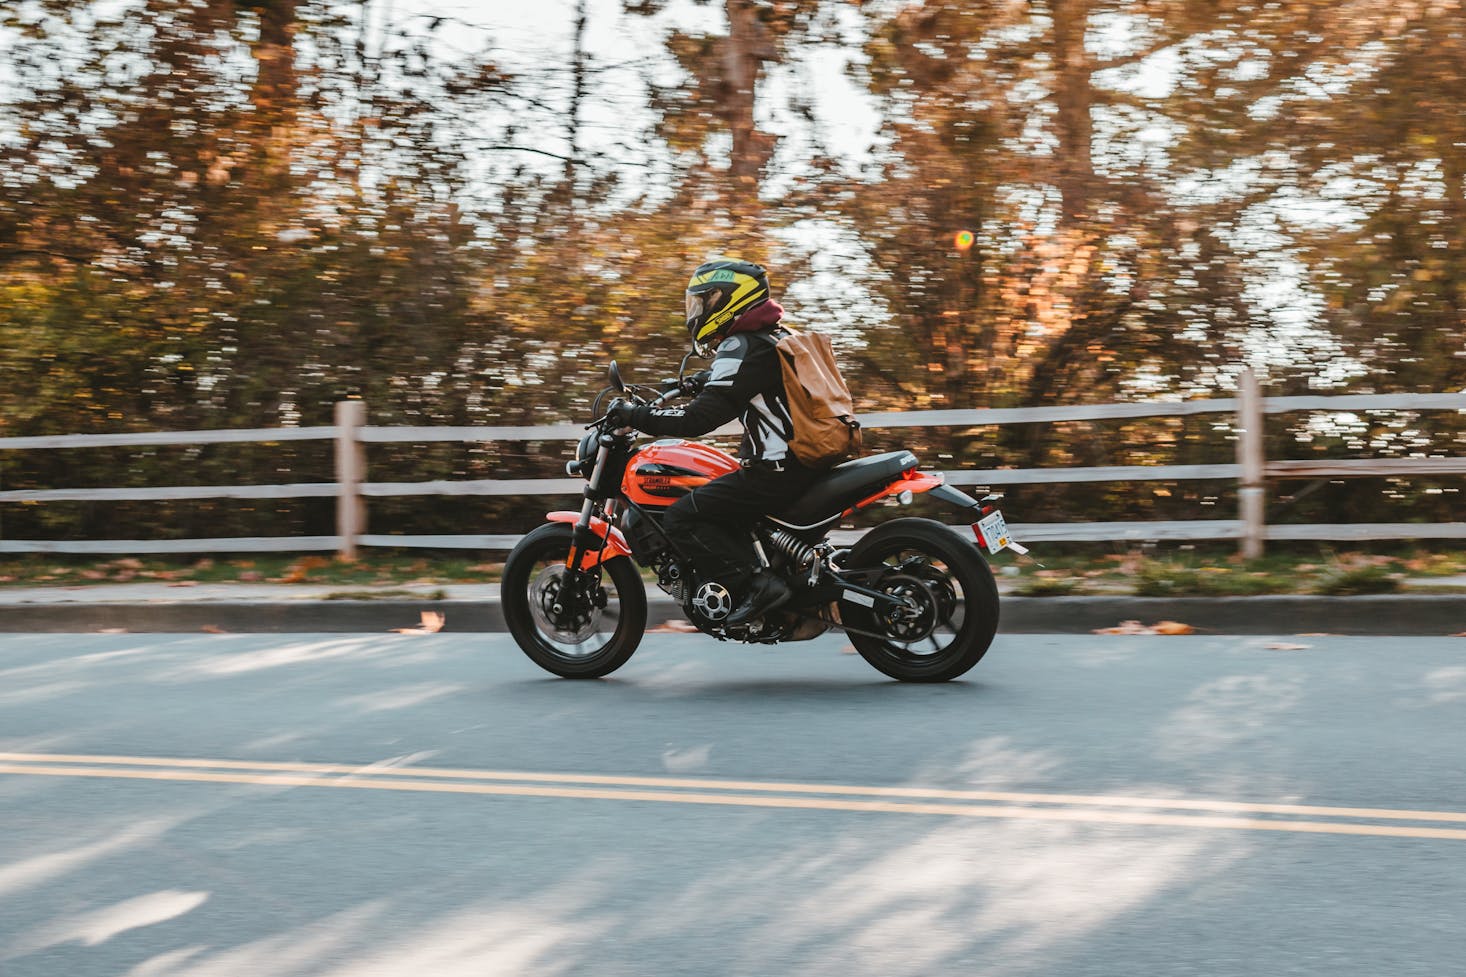 Motorcycle ride in Vancouver